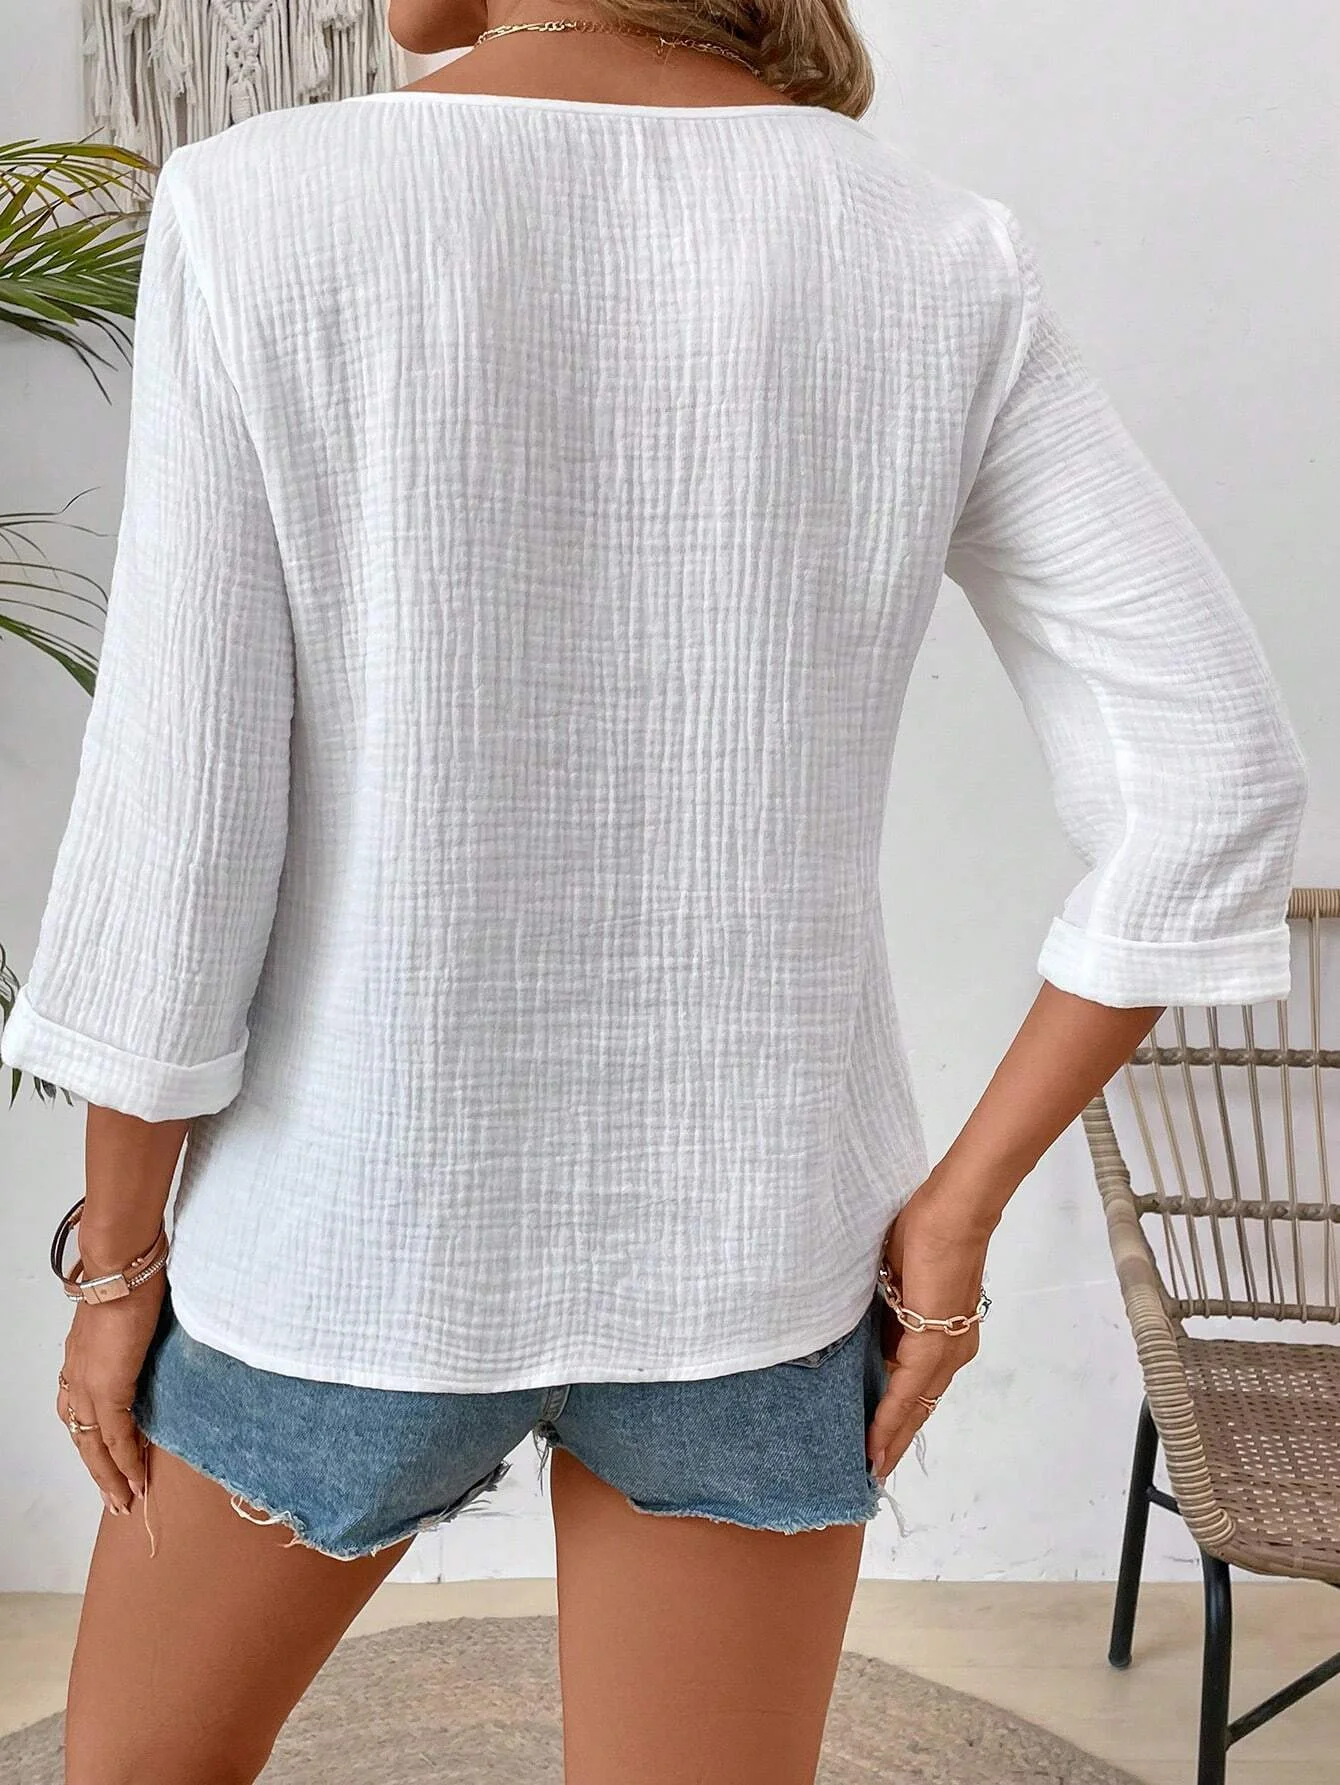 Women's 3/4 Sleeve Summer Blouse Plain Cotton Square Neck Notched Daily Going Out Simple Top Spring/Fall White